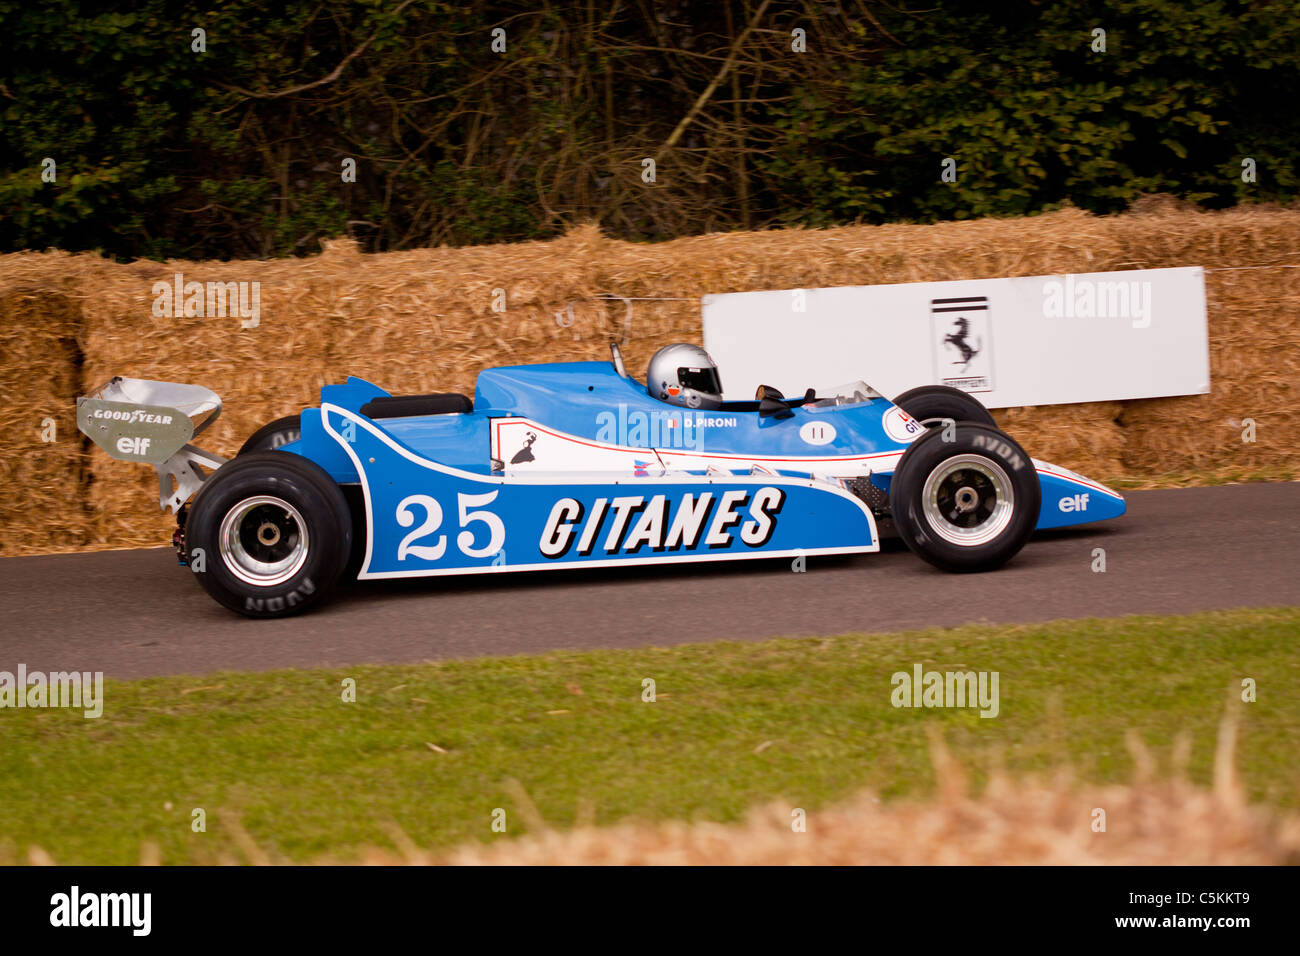 The Benetton B186 was the Formula One car built and raced by the Benetton  team for the 1986 Formula One season at Goodwood Hill Stock Photo - Alamy